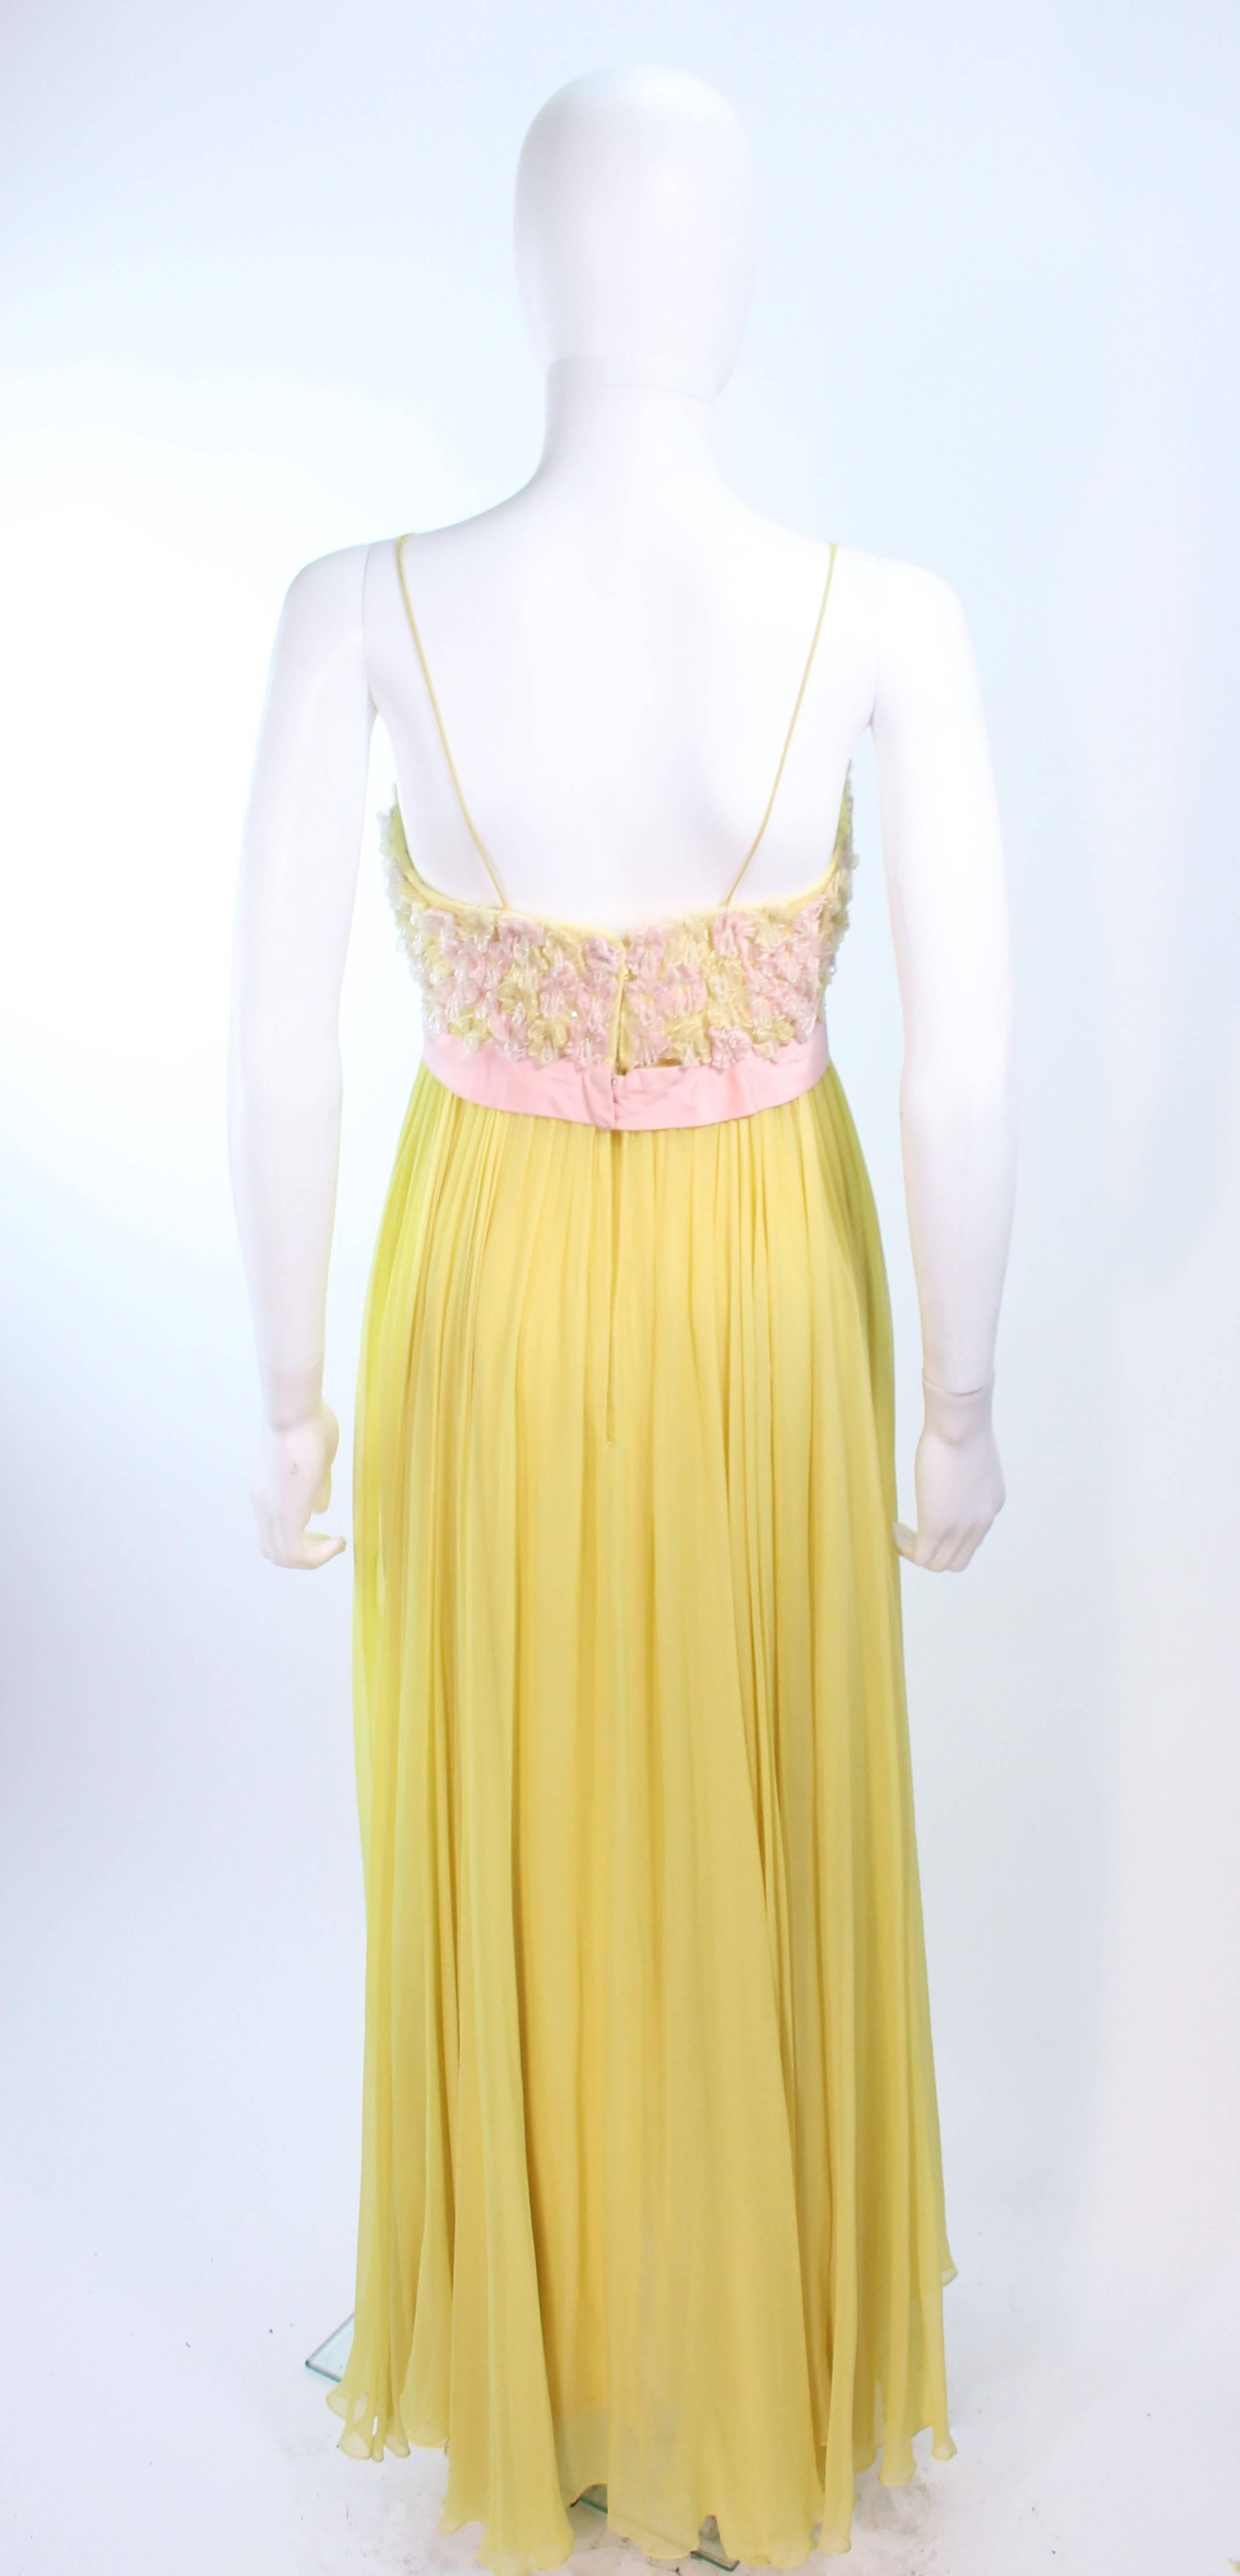 VICTORIA ROYAL Embellished Yellow Silk Gown Size 4 For Sale 1